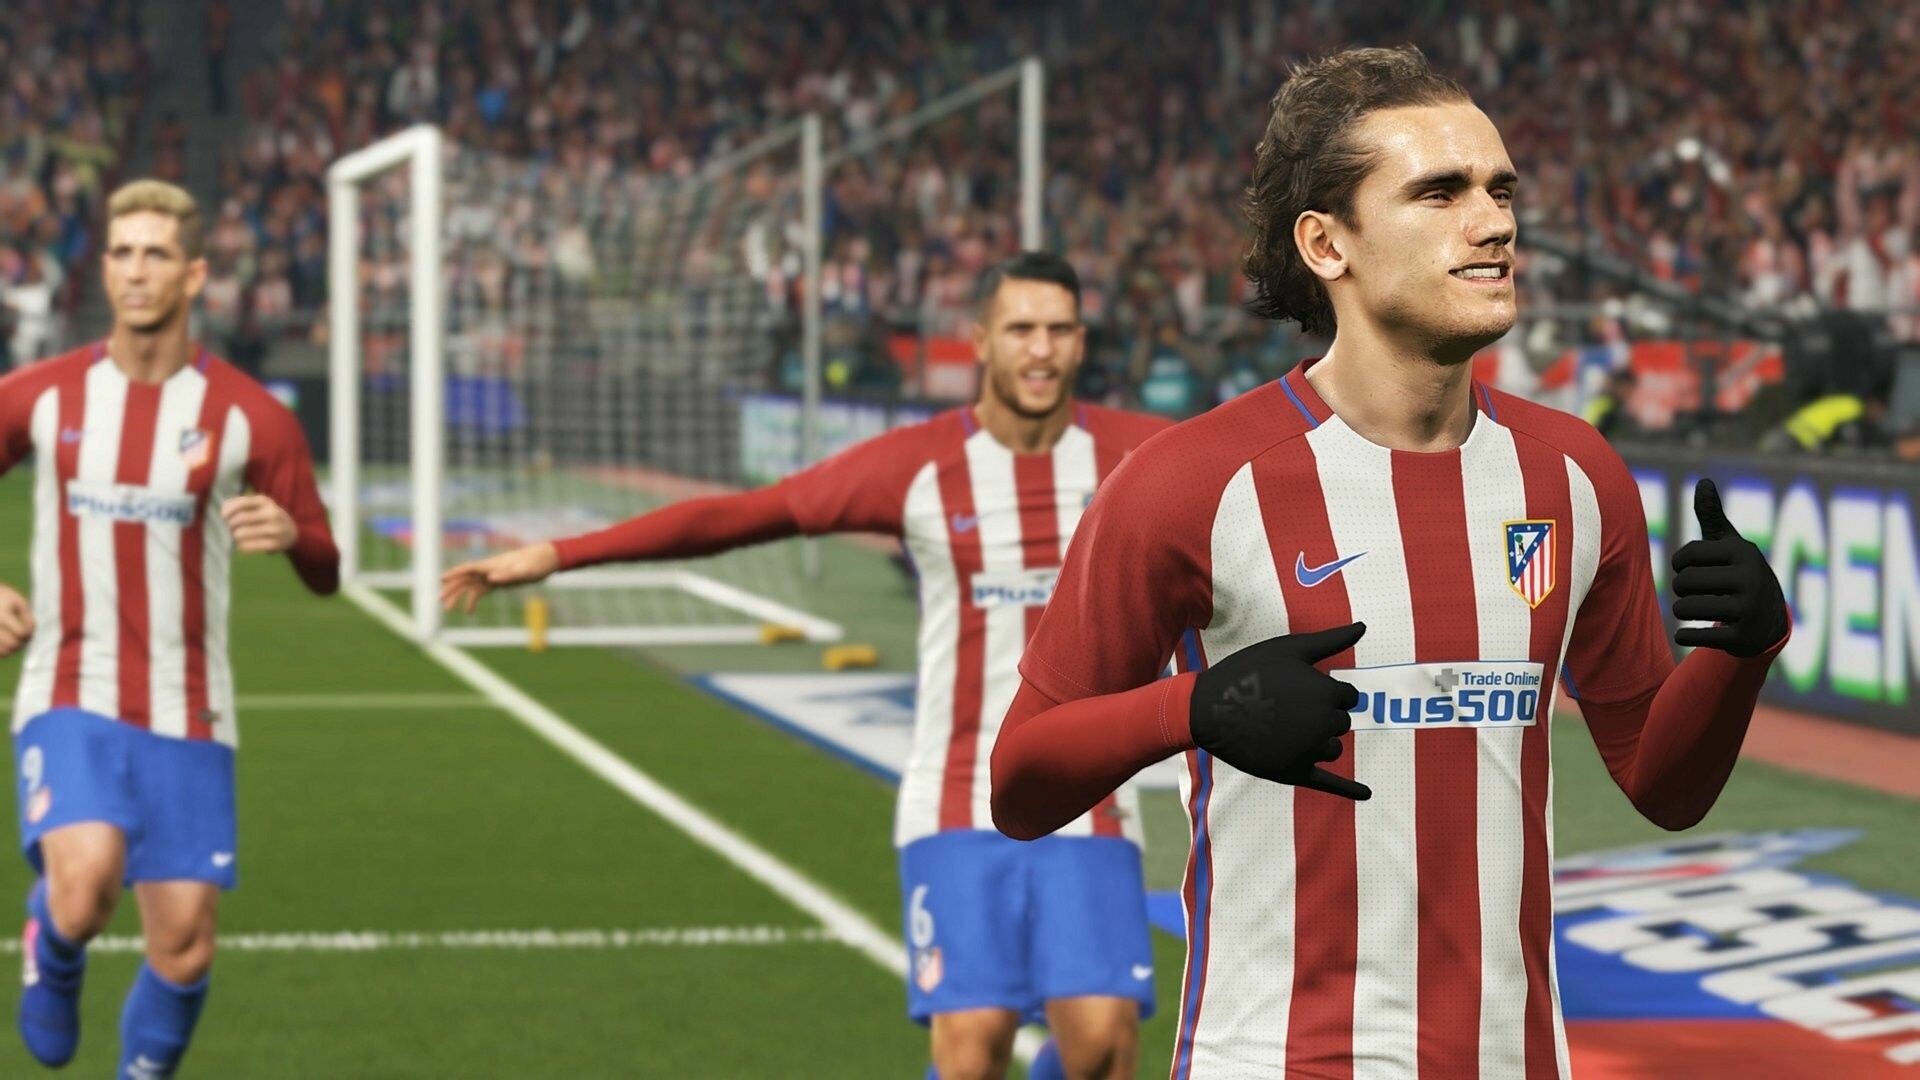 FIFA: The 25th installment, Introduces Real Player Motion Technology. 1920x1080 Full HD Background.